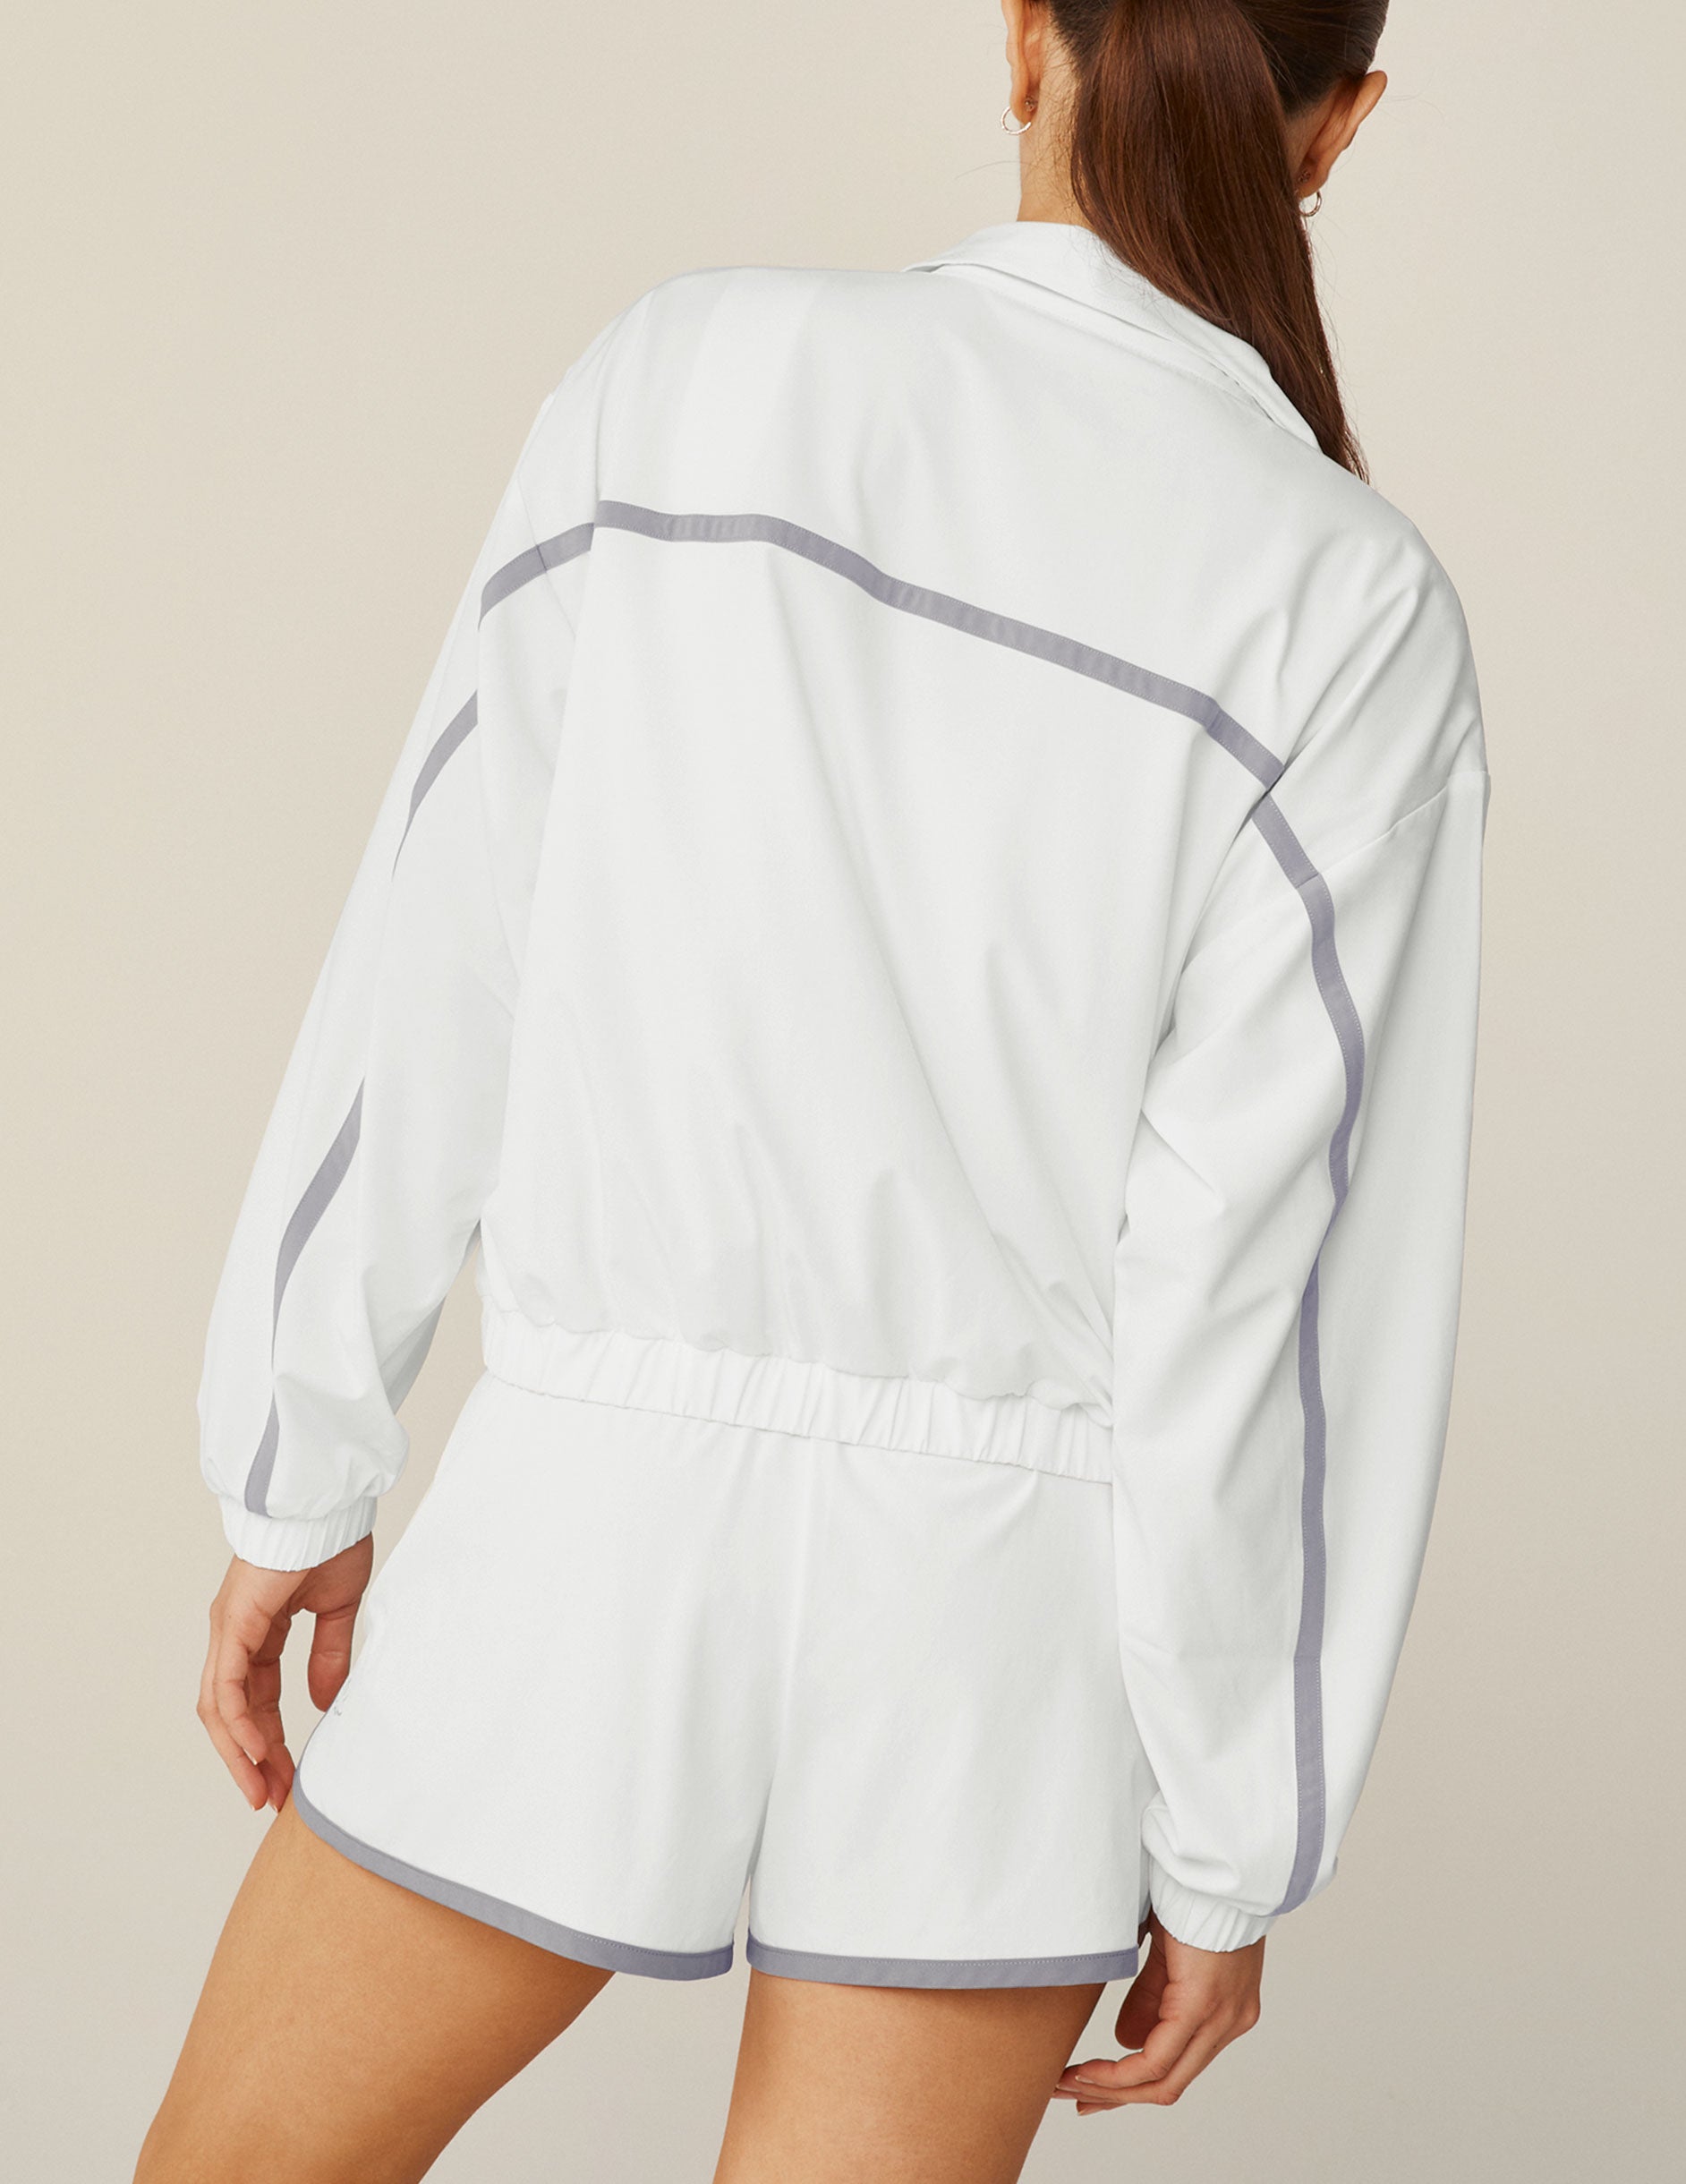 white zip-up jacket with grey lining. 